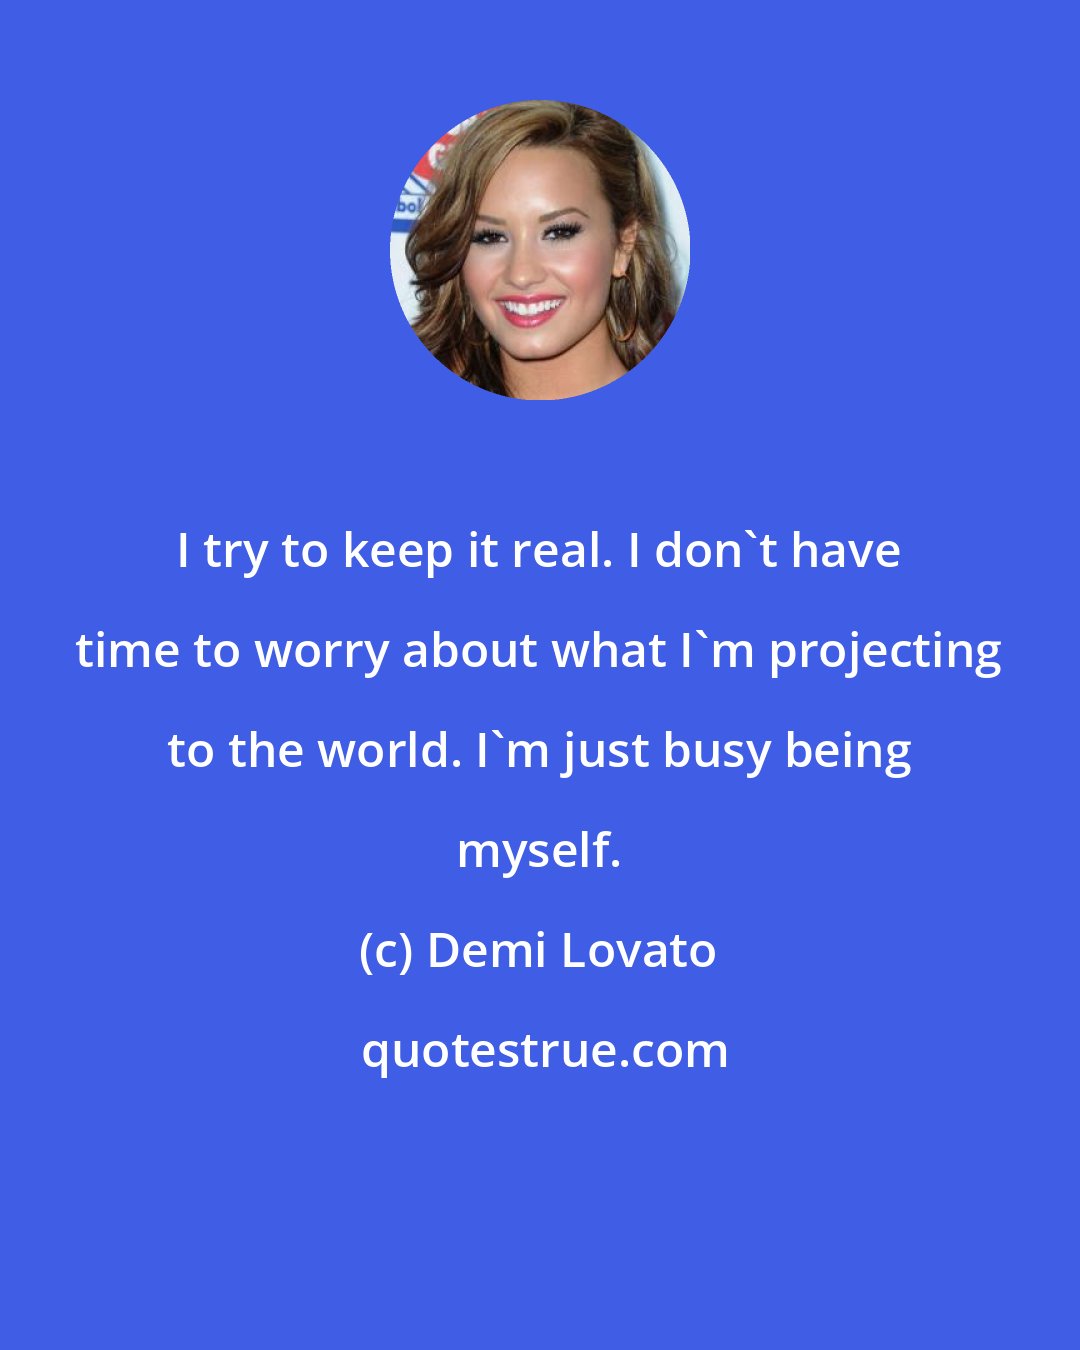 Demi Lovato: I try to keep it real. I don't have time to worry about what I'm projecting to the world. I'm just busy being myself.